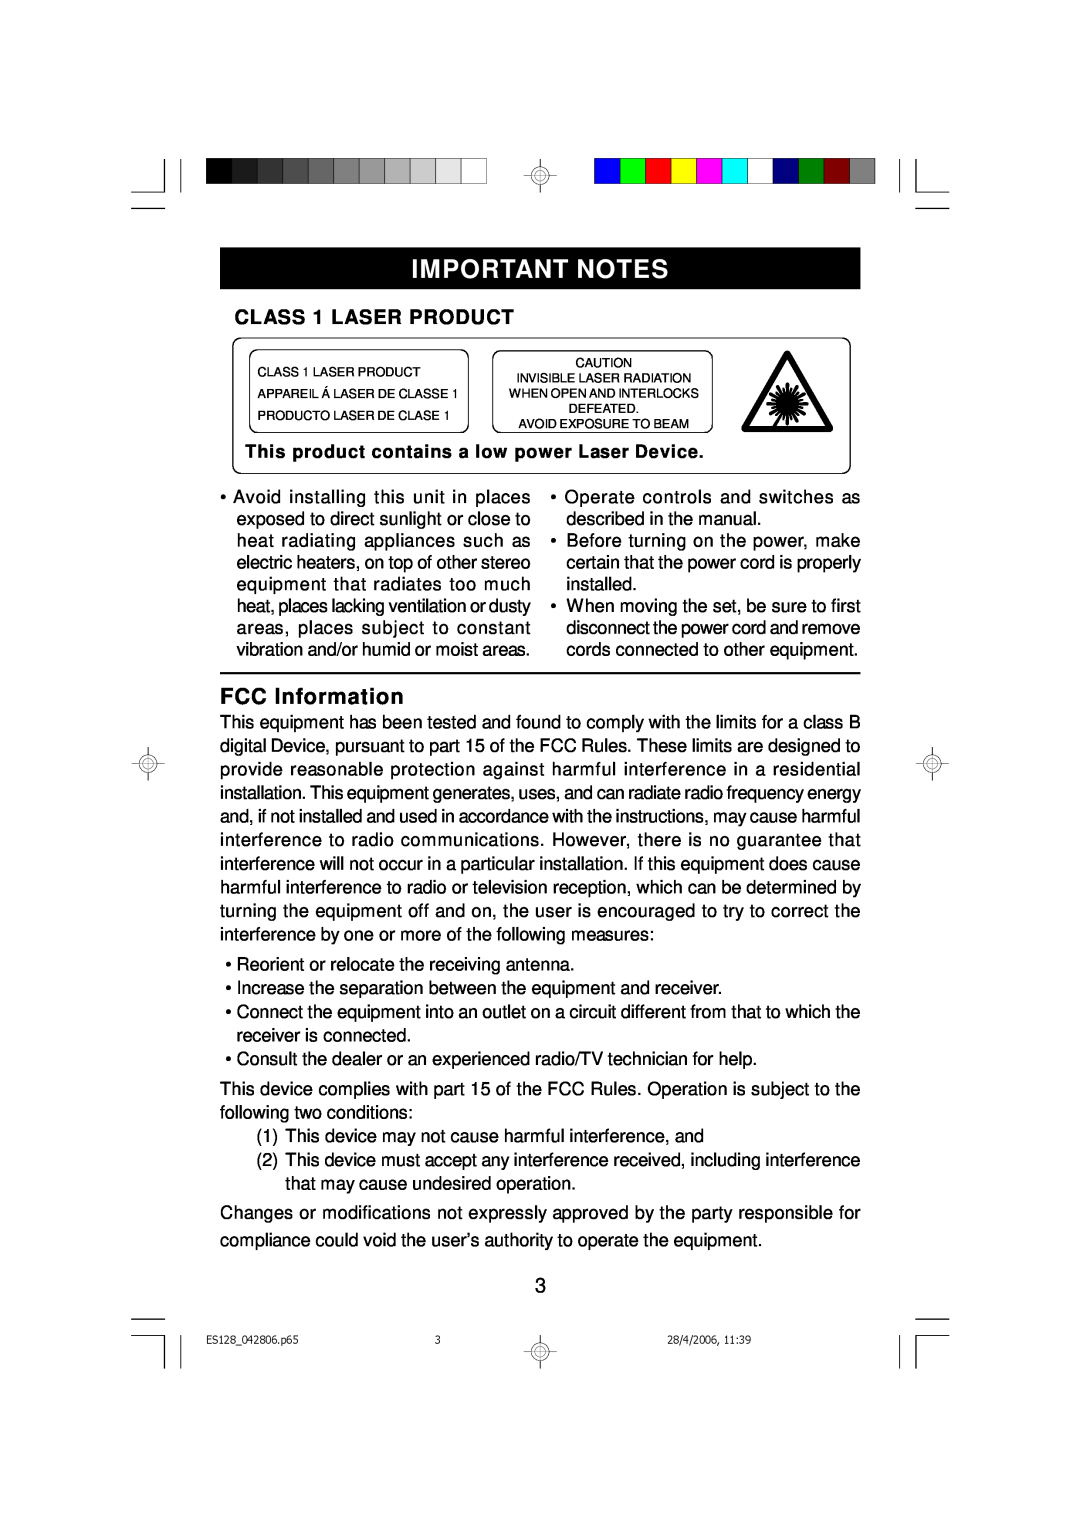 Emerson ES128 owner manual Important Notes, FCC Information, CLASS 1 LASER PRODUCT 